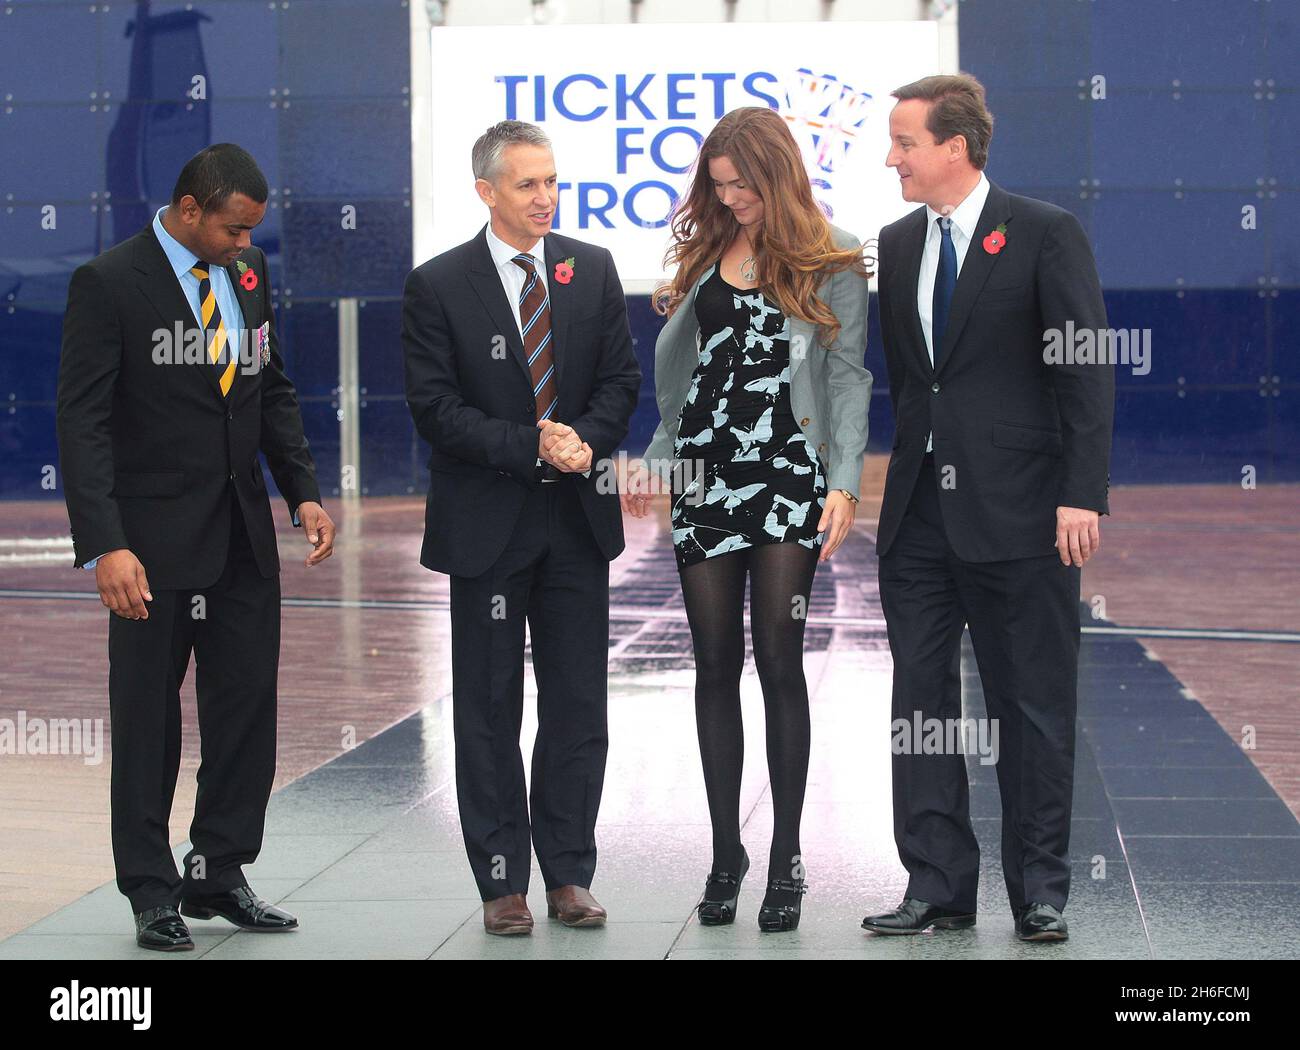 Conservative leader David Cameron launches his Tickets for Troops scheme encouraging promoters of music concerts and sporting events to give free tickets to soldiers. Picture shows: David Cameron with soldier Johnson Beharry, singer Joss Stone and former footballer Gary Lineker Stock Photo